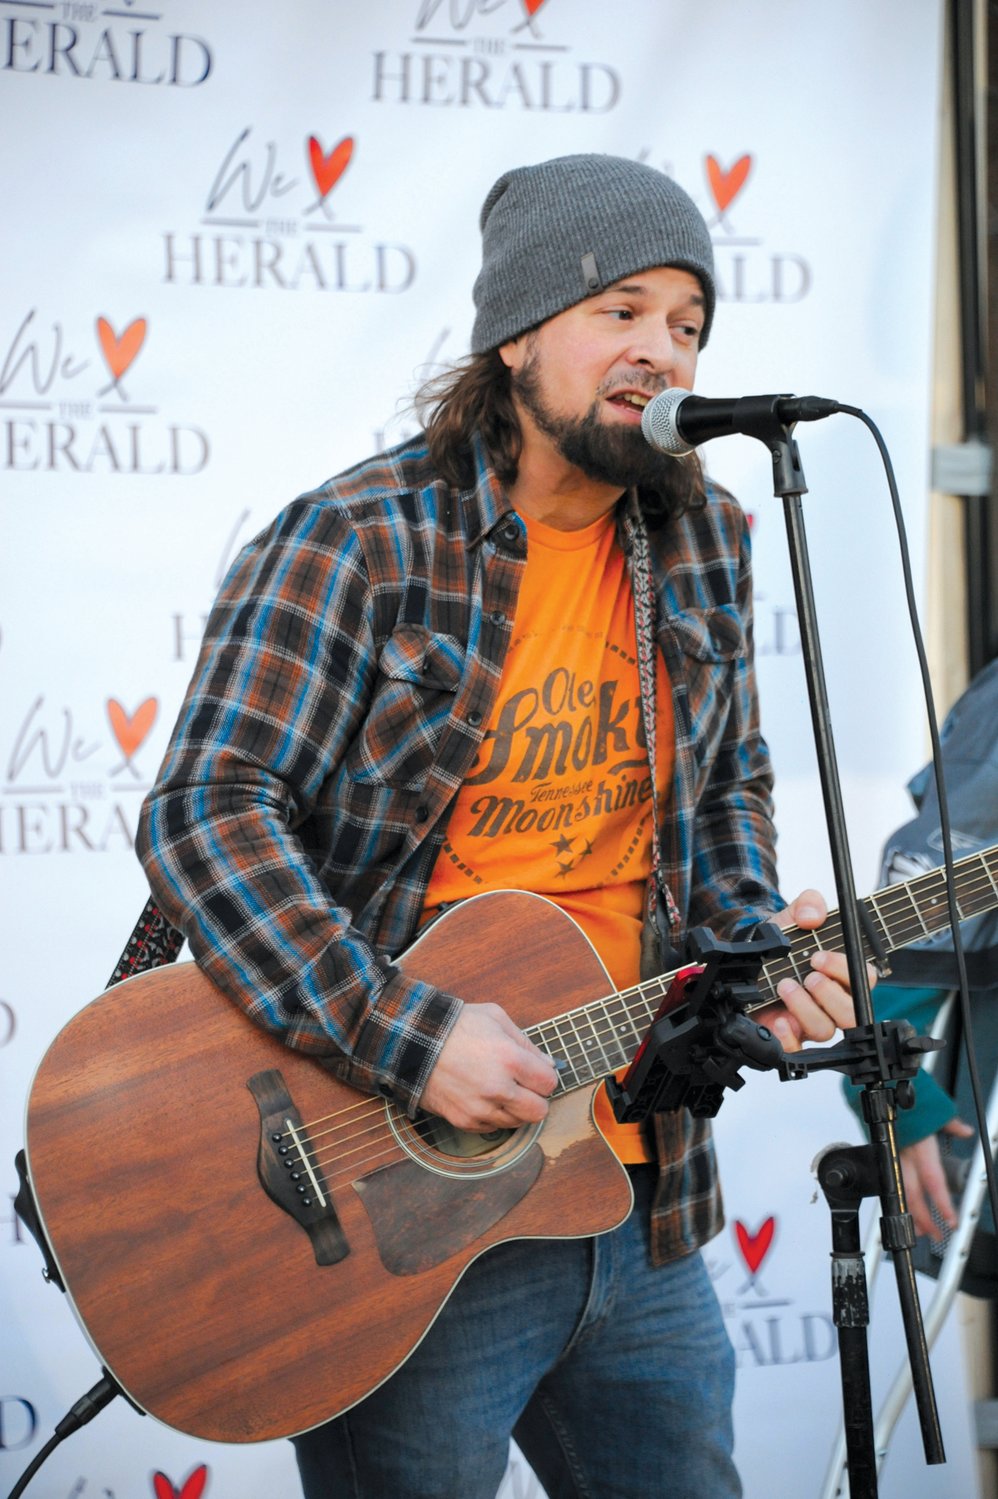 Singer/songwriter Jamie Stem performs at the Herald’s Eagles pep rally on Friday. Stem, who is from Doylestown, has gained notoriety for writing Philadelphia Eagles-related lyrics to the music of Leonard Cohen’s Hallelujah.